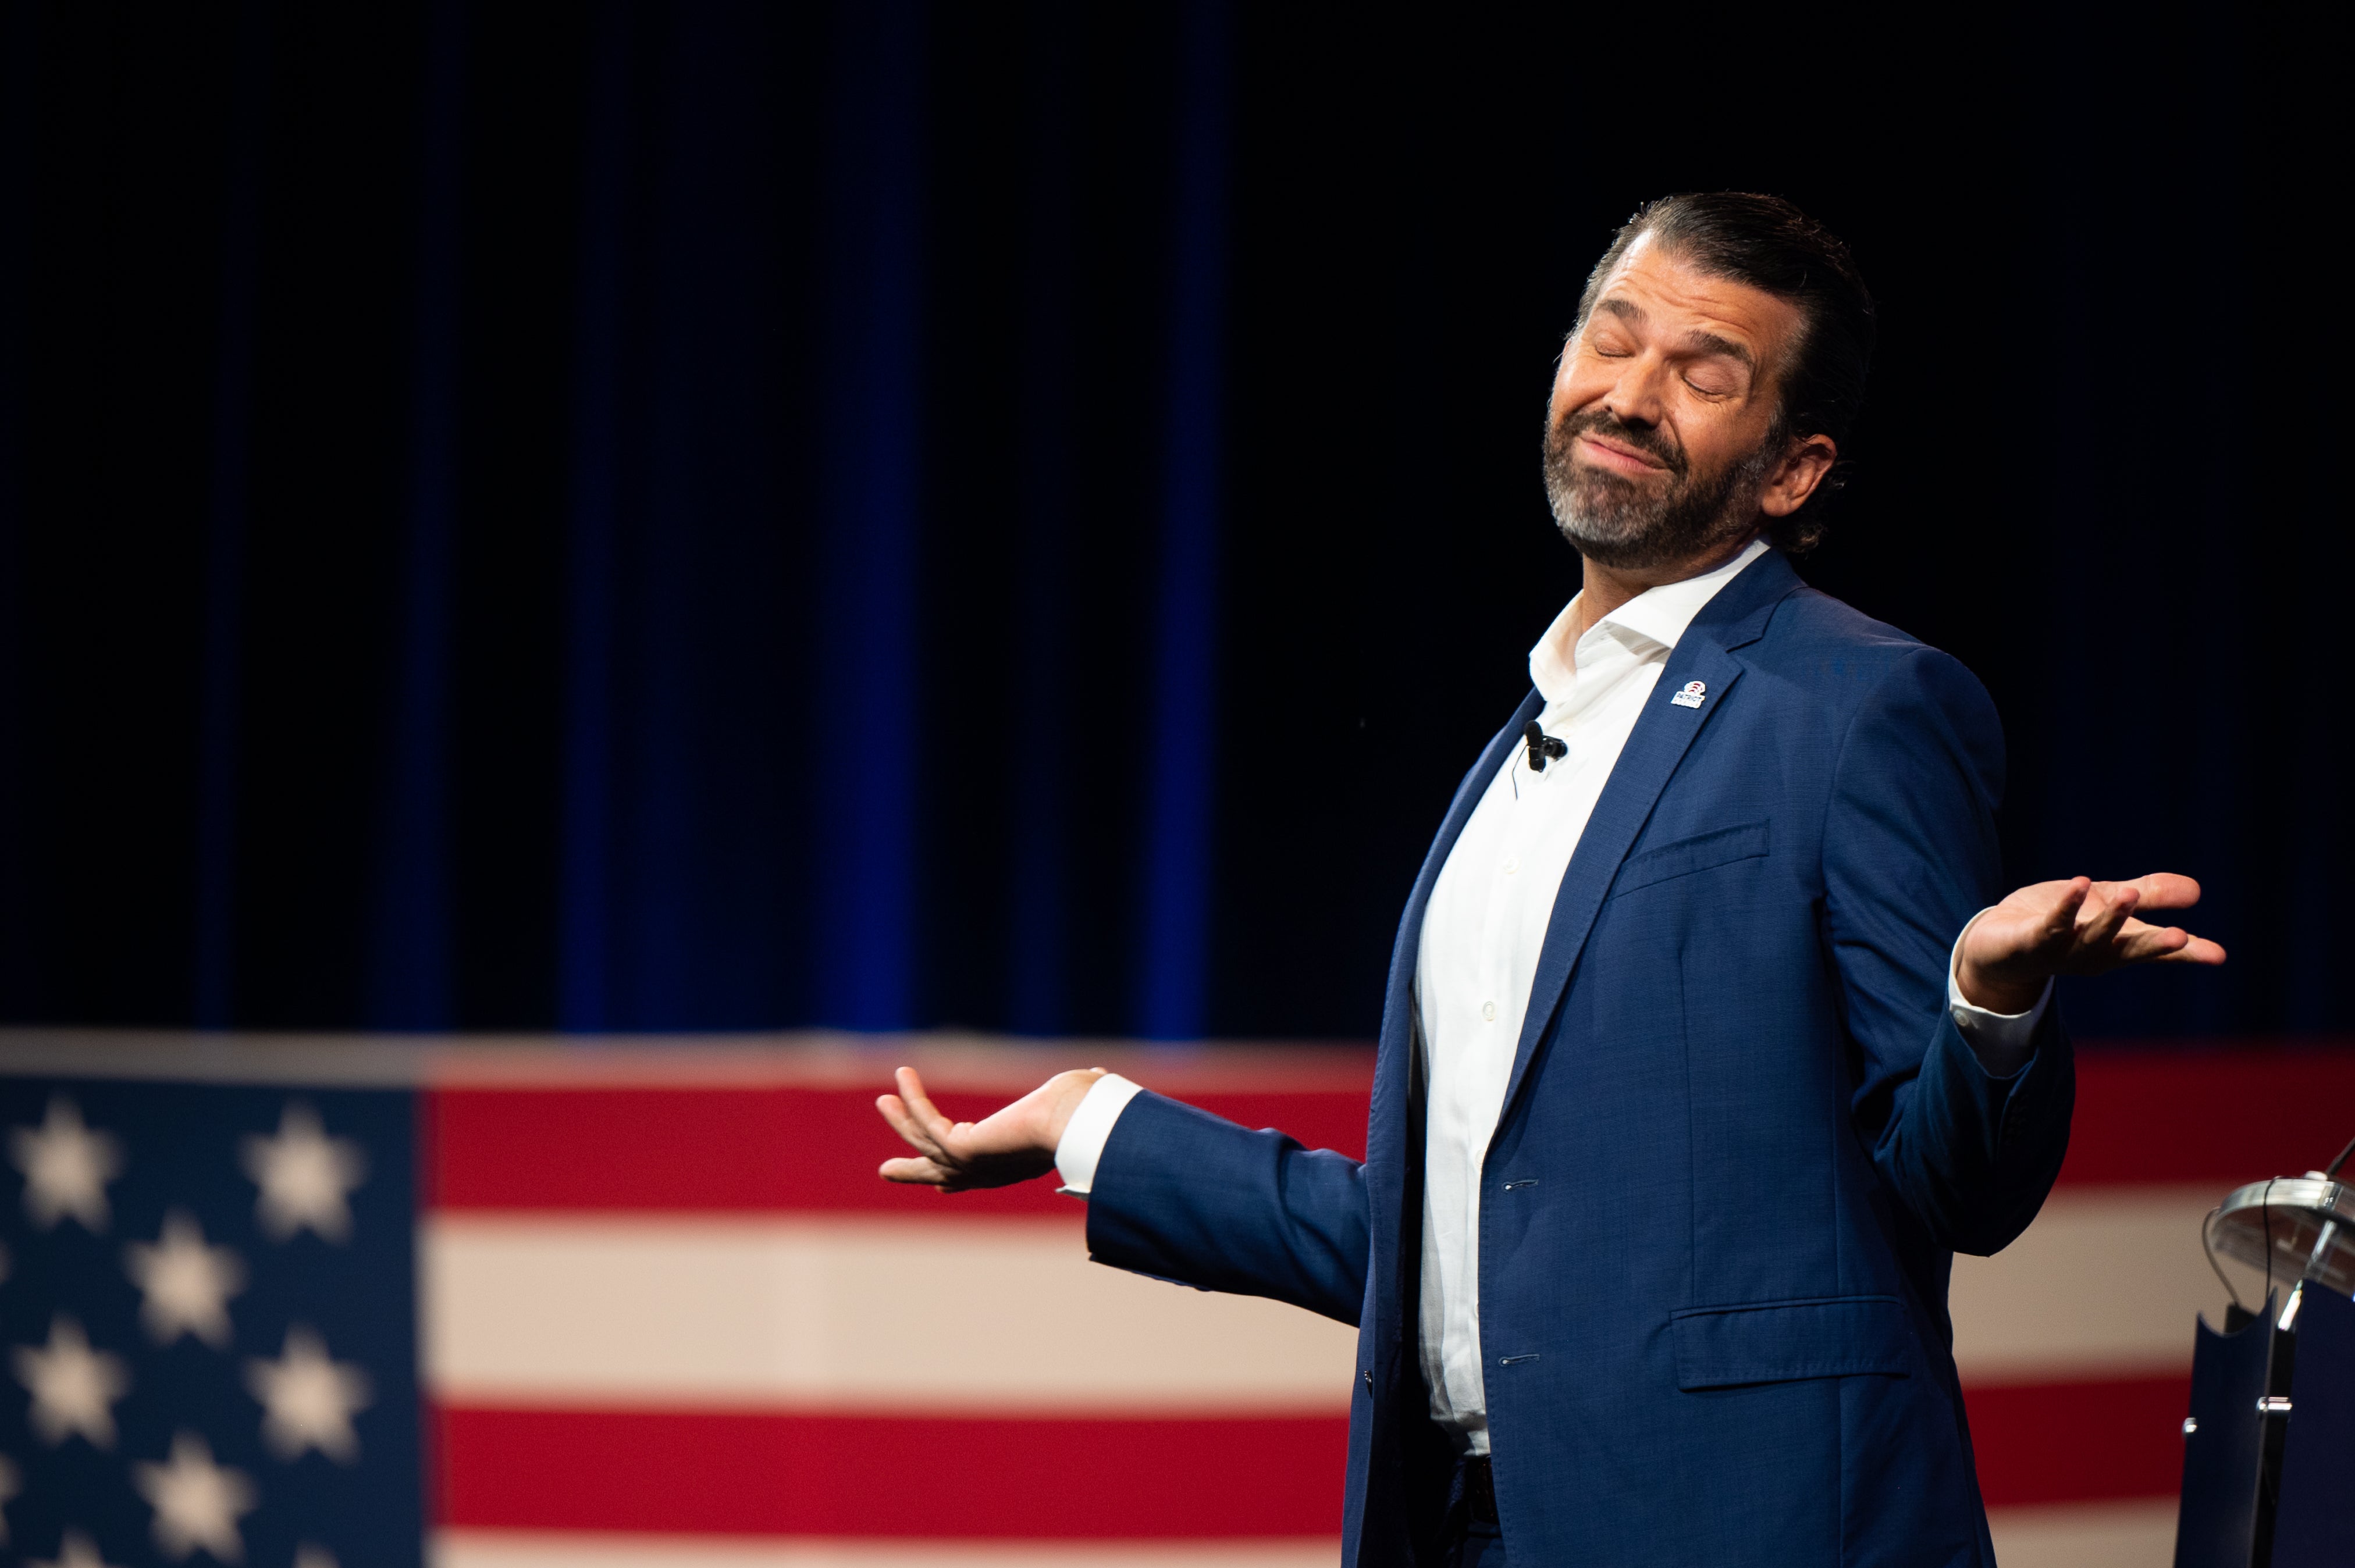 Earlier this month, Trump Jr posted an offensive rant against Biden on Facebook that was also widely criticised